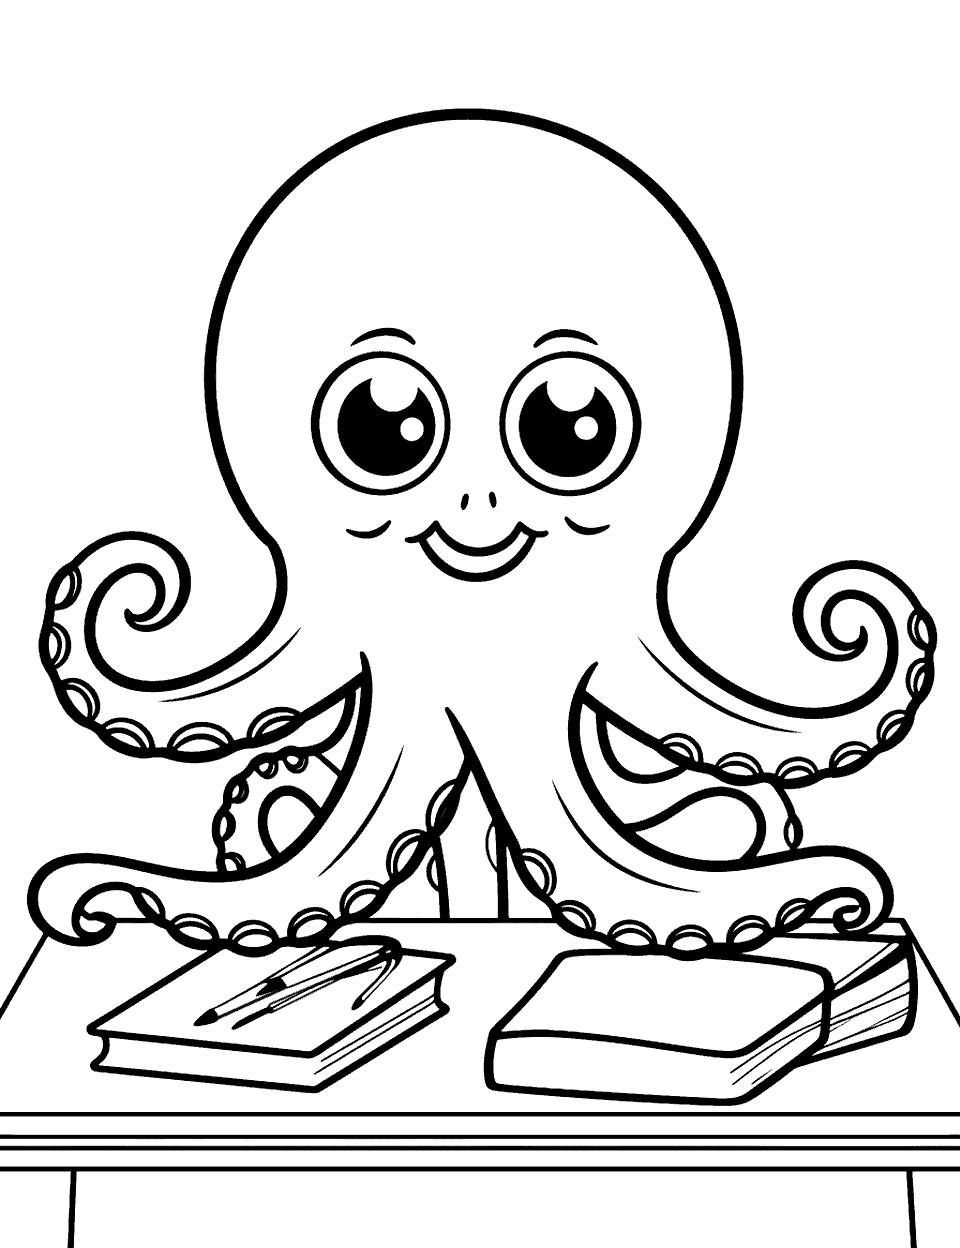 Cartoon Octopus in School Coloring Page - A cartoon-style octopus sitting at a desk in a classroom.